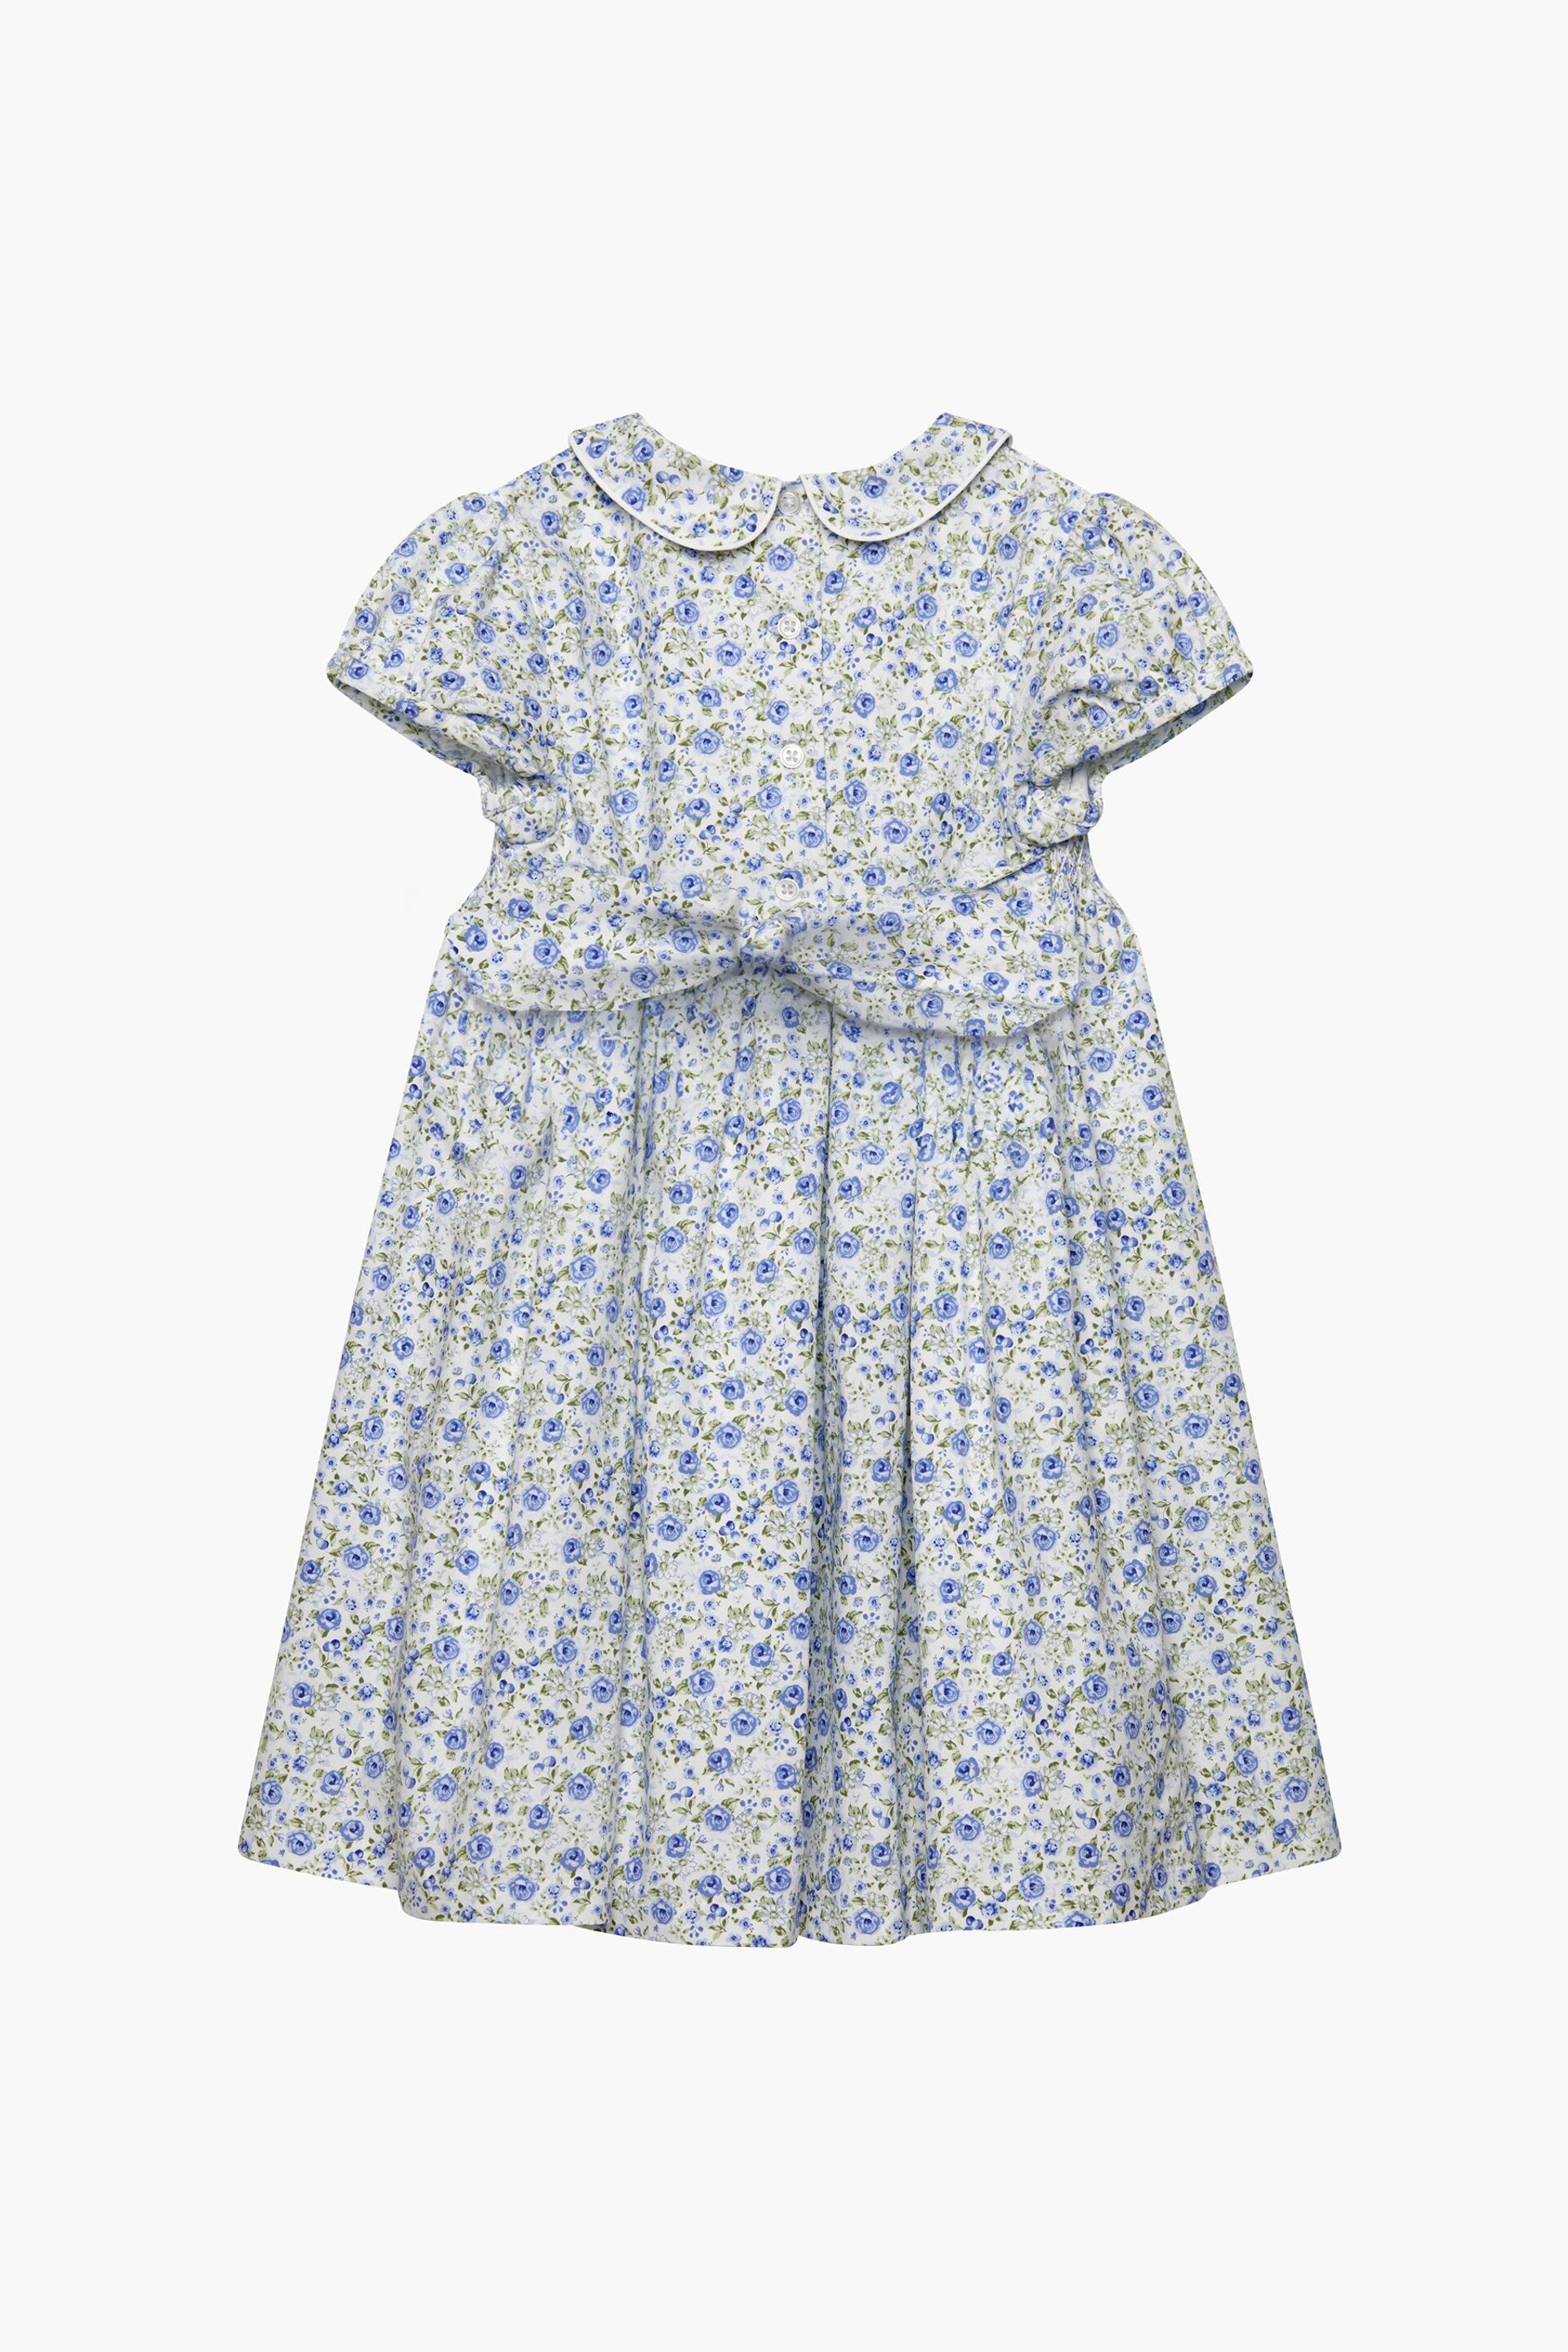 Trotters London Rose Catherine Rose Smocked Cotton Dress - Image 6 of 7